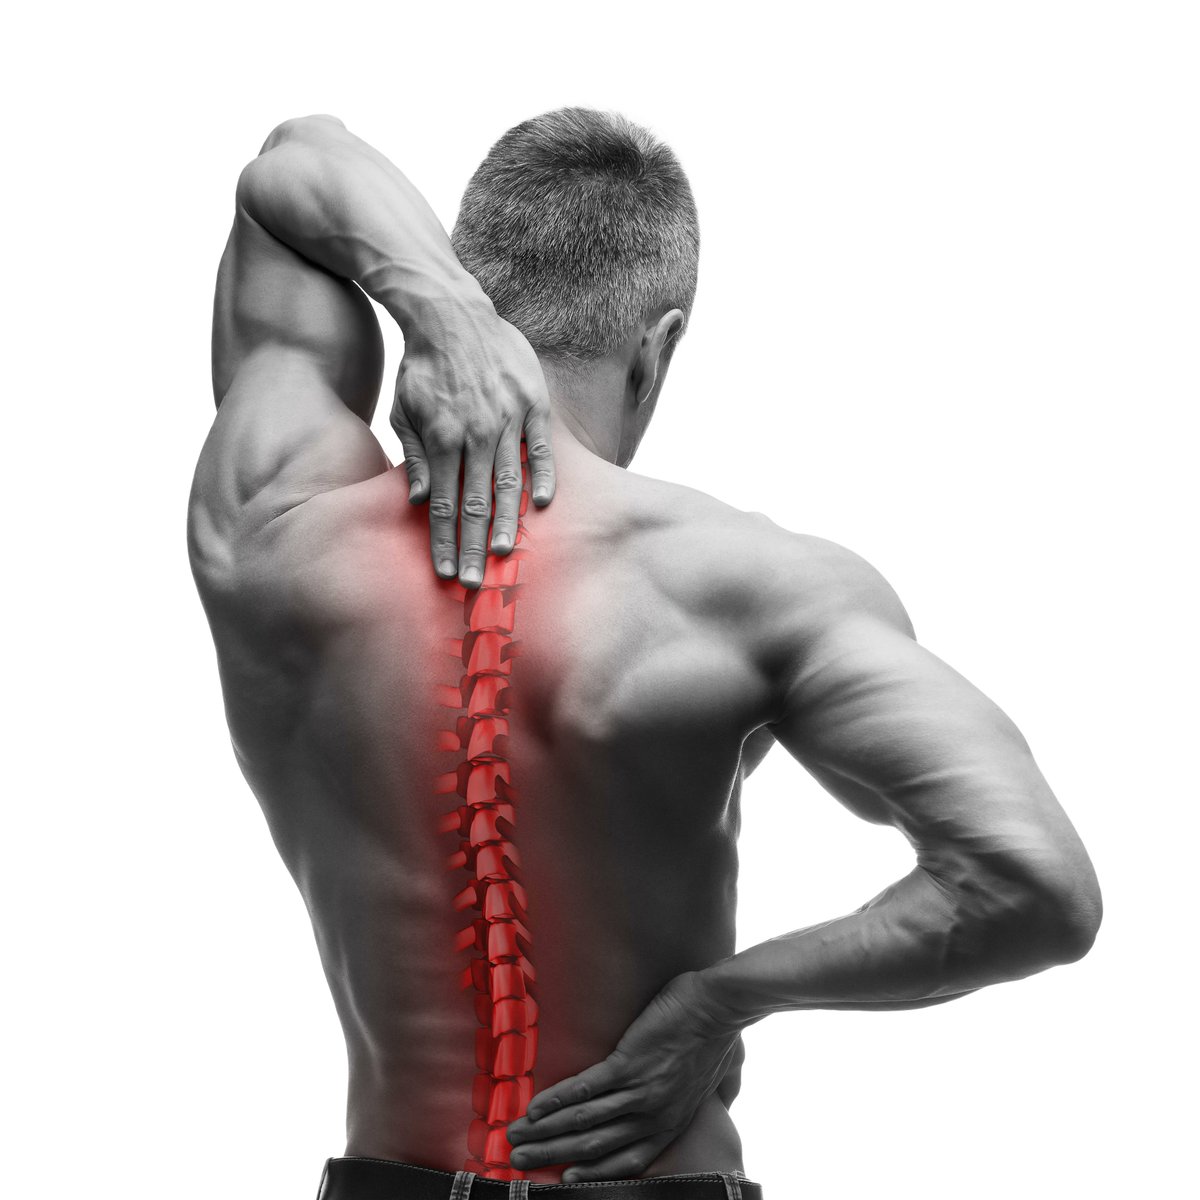 Do you have chronic #backpain? Have you considered #spinalinjections? Dr. Le explains spinal injections & the benefits. Schedule an appointment with #Newportcare today if you are living with #chronicbackpain.
•
•
•
#cortisoneinjetions #triggerpointinjections #newportbeachortho